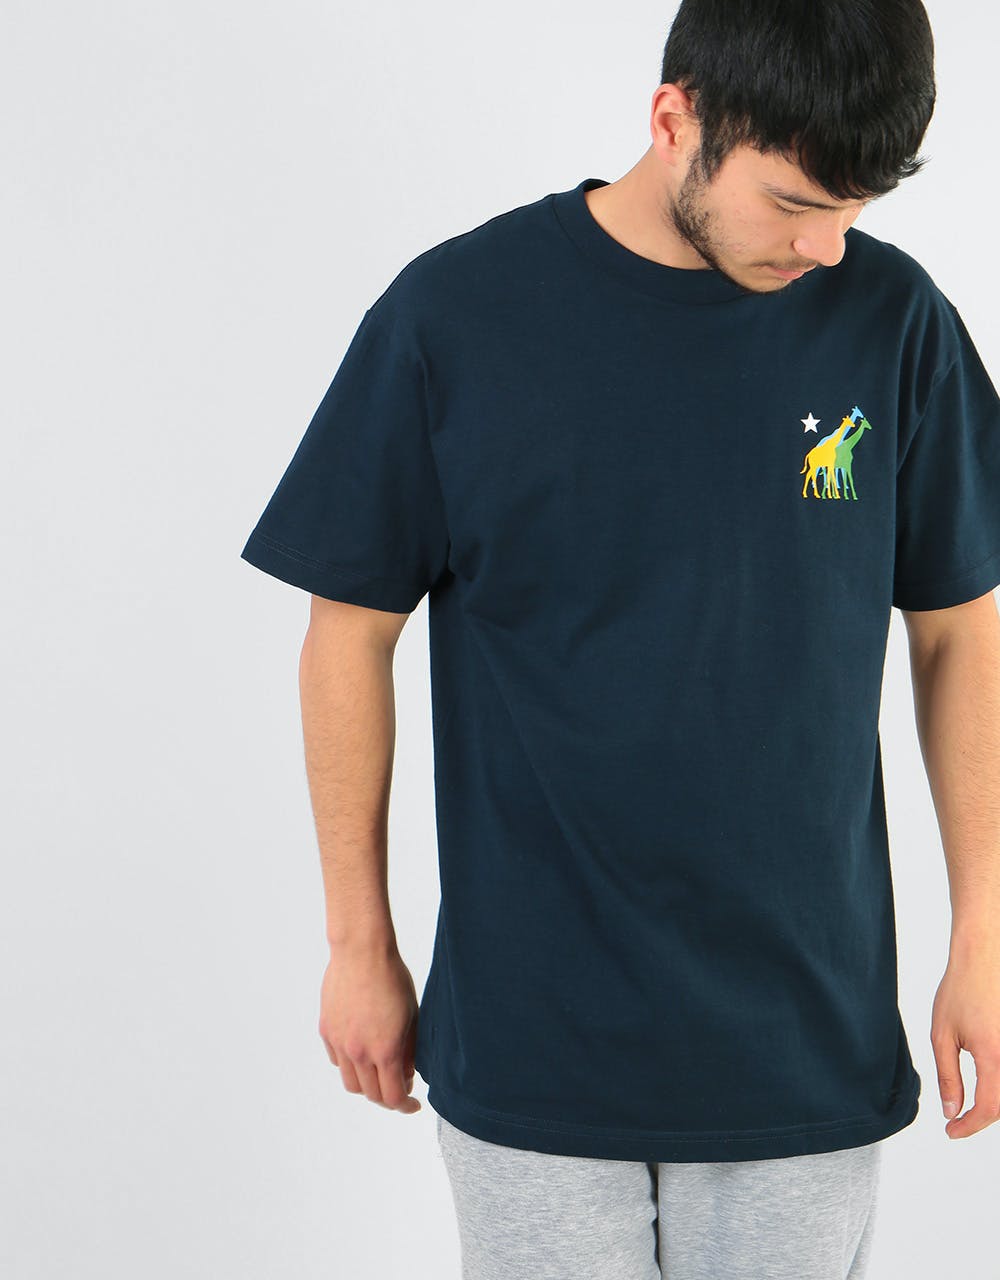 LRG Roots People T-Shirt - Navy